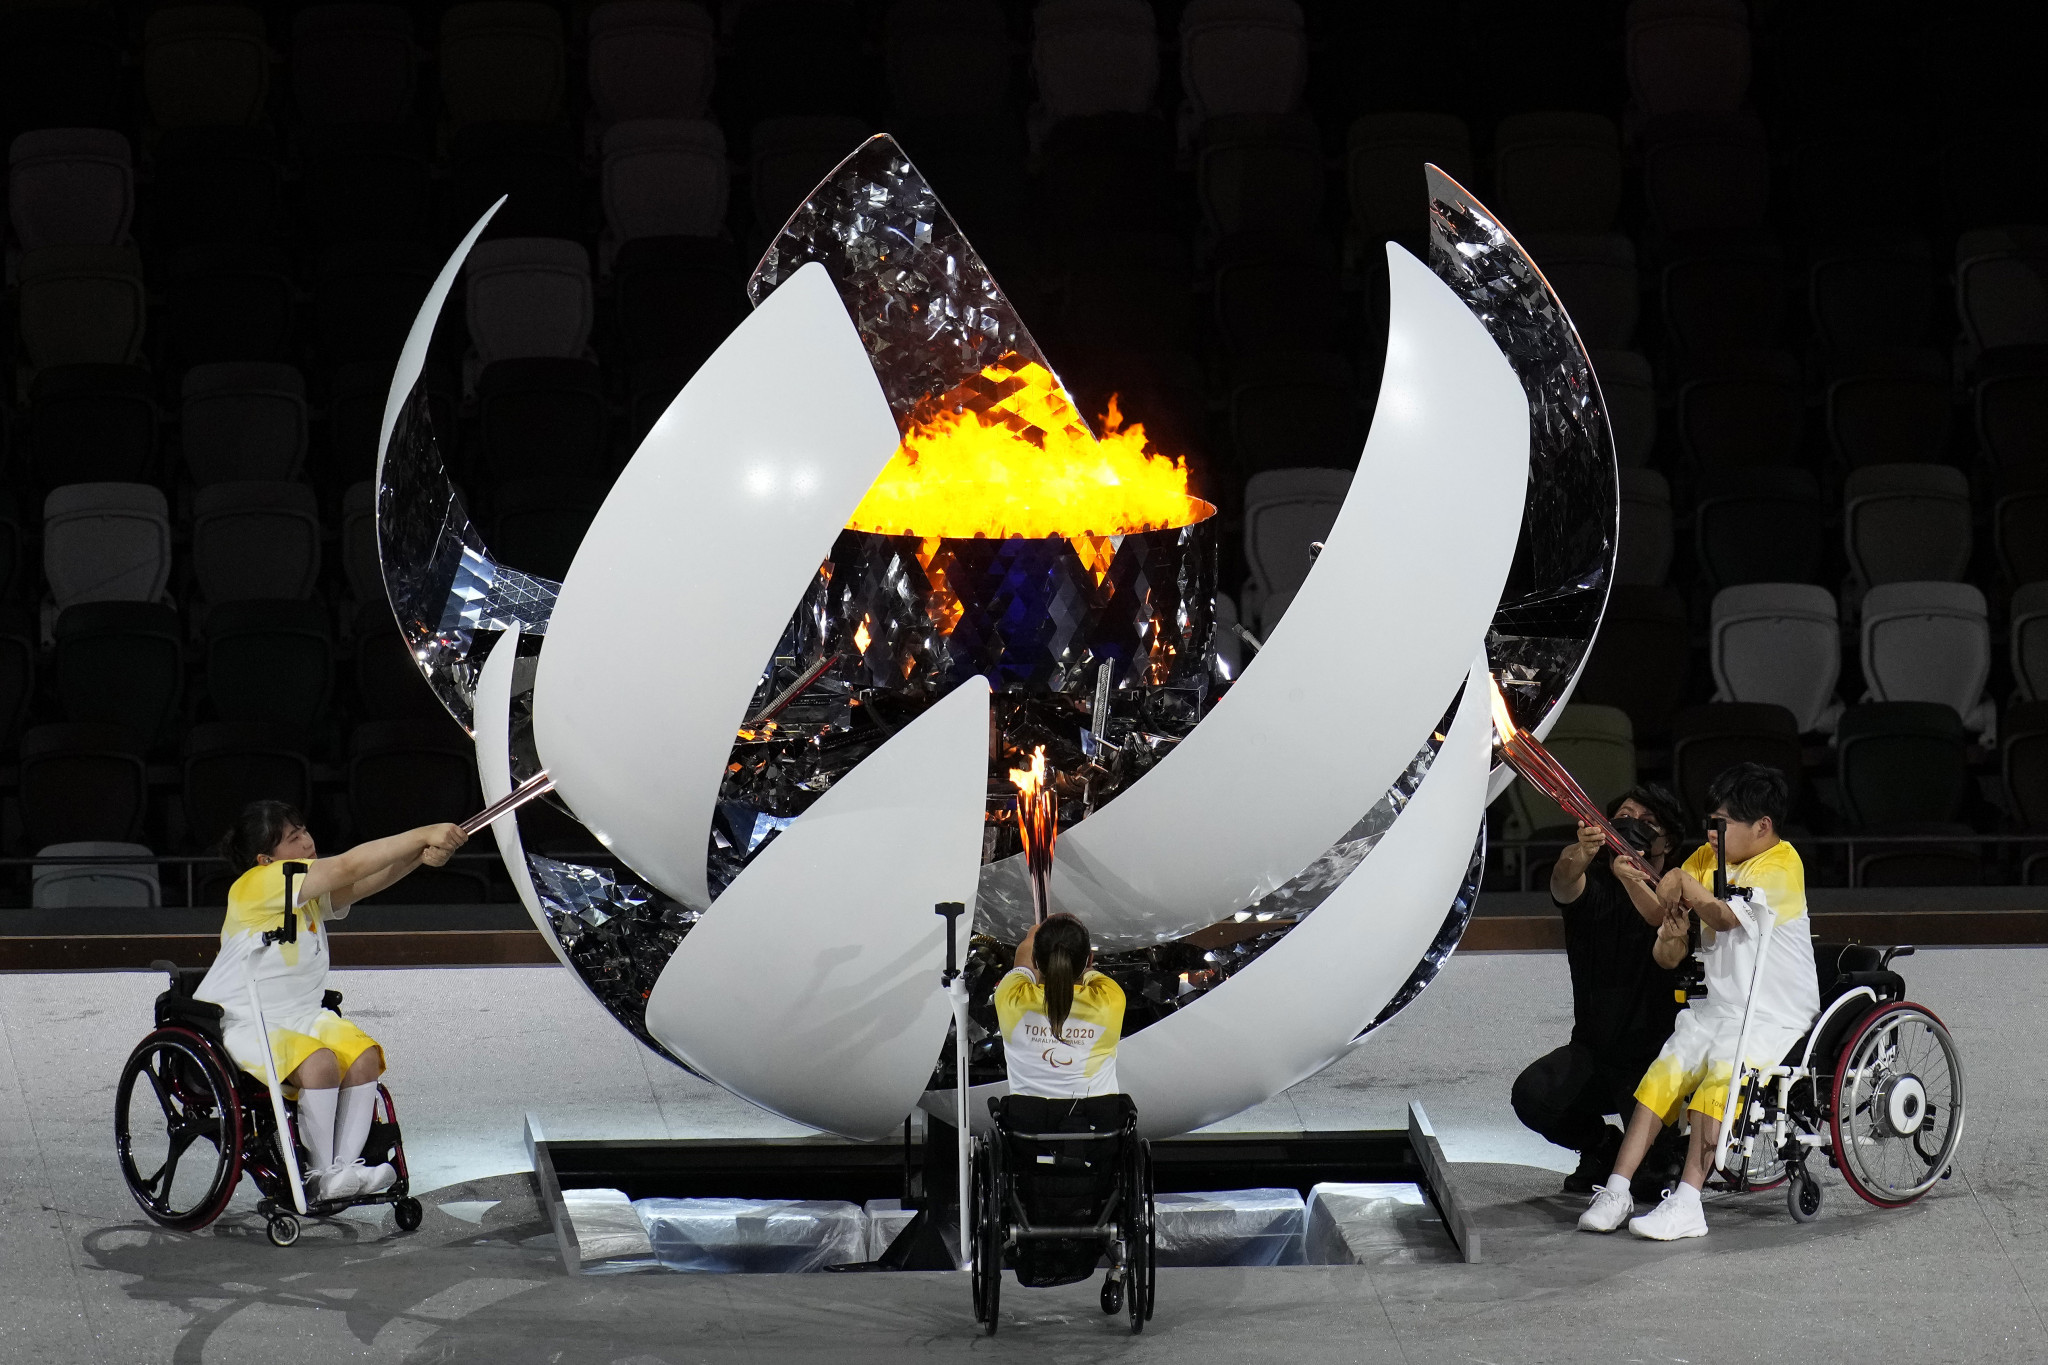 Karin Morisaki, left, Yui Kamiji, centre and Shunsuke Uchida, right, were the athletes given the honour of setting the Cauldron alight during the Paralympics Opening Ceremony ©Getty Images